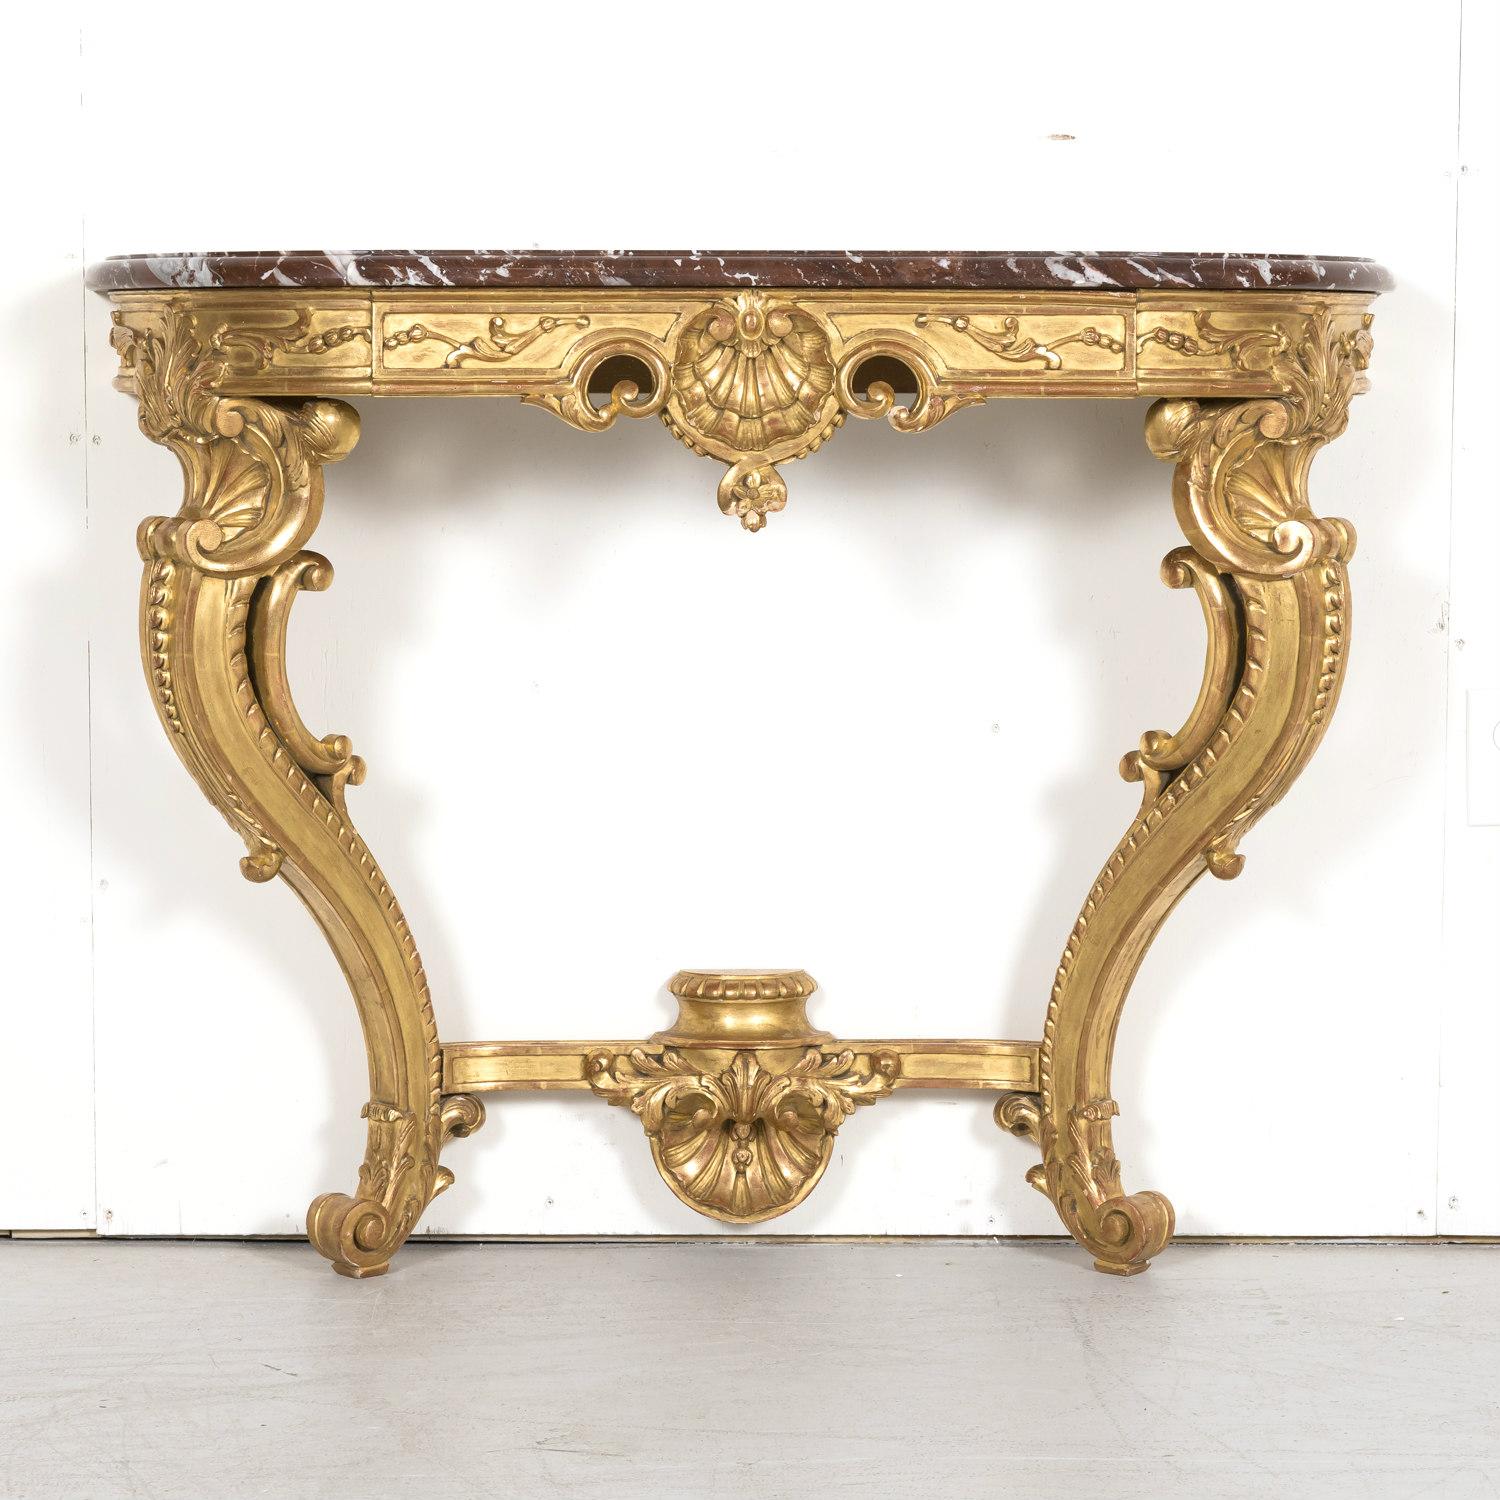 Fine 19th Century French Louis XV Rococo Style Giltwood Wall Console with Marble In Good Condition For Sale In Birmingham, AL